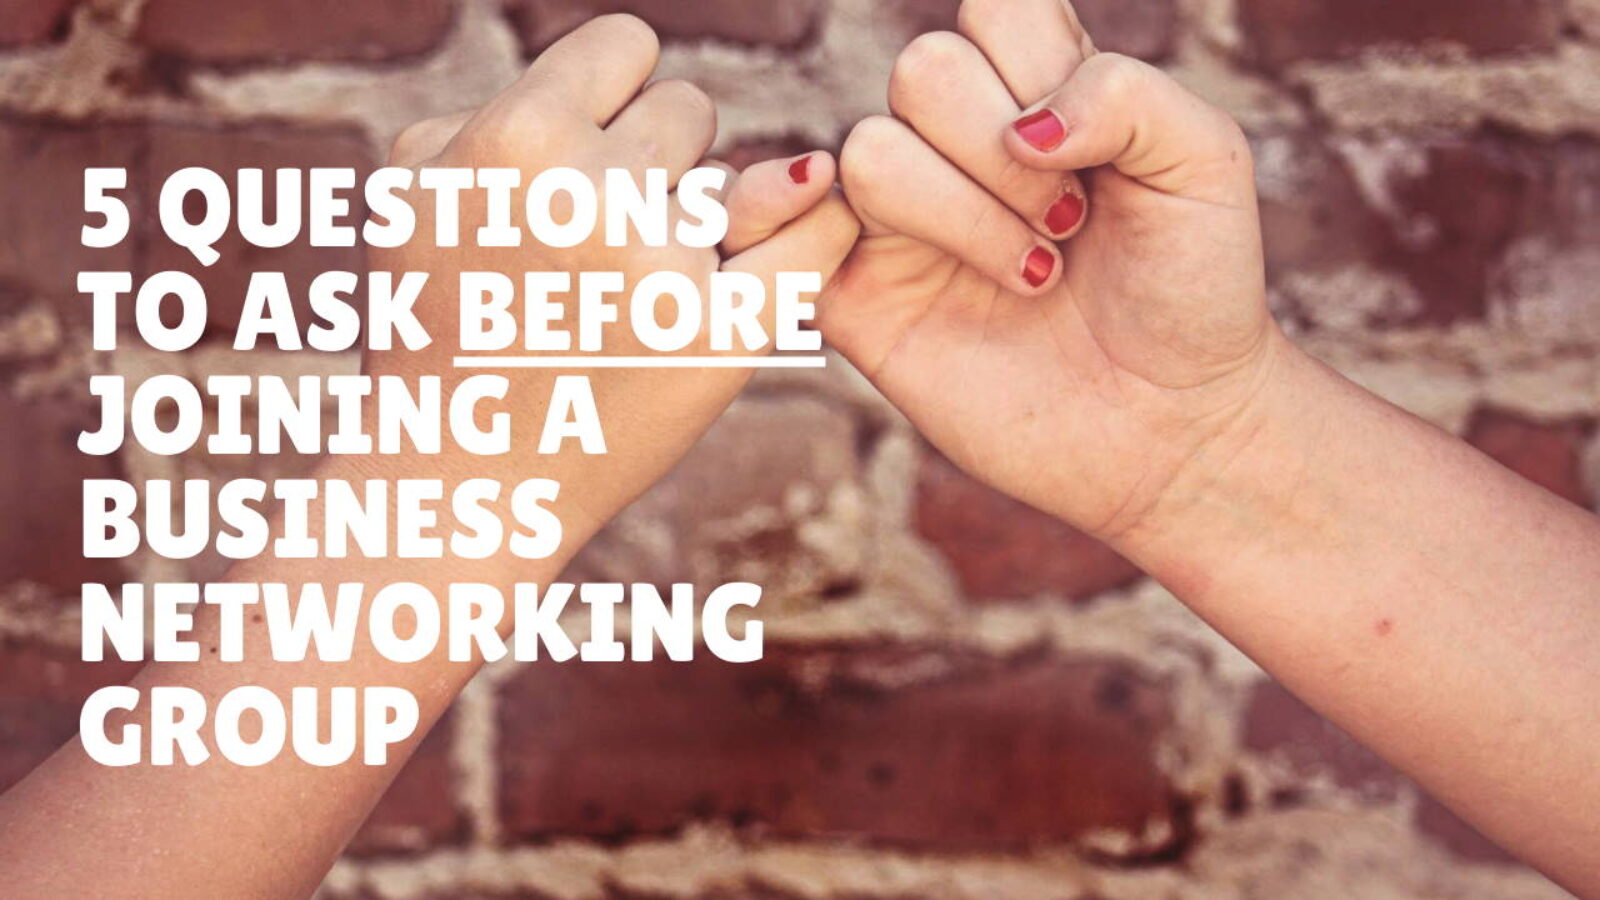 Five questions to ask before joining a business networking group